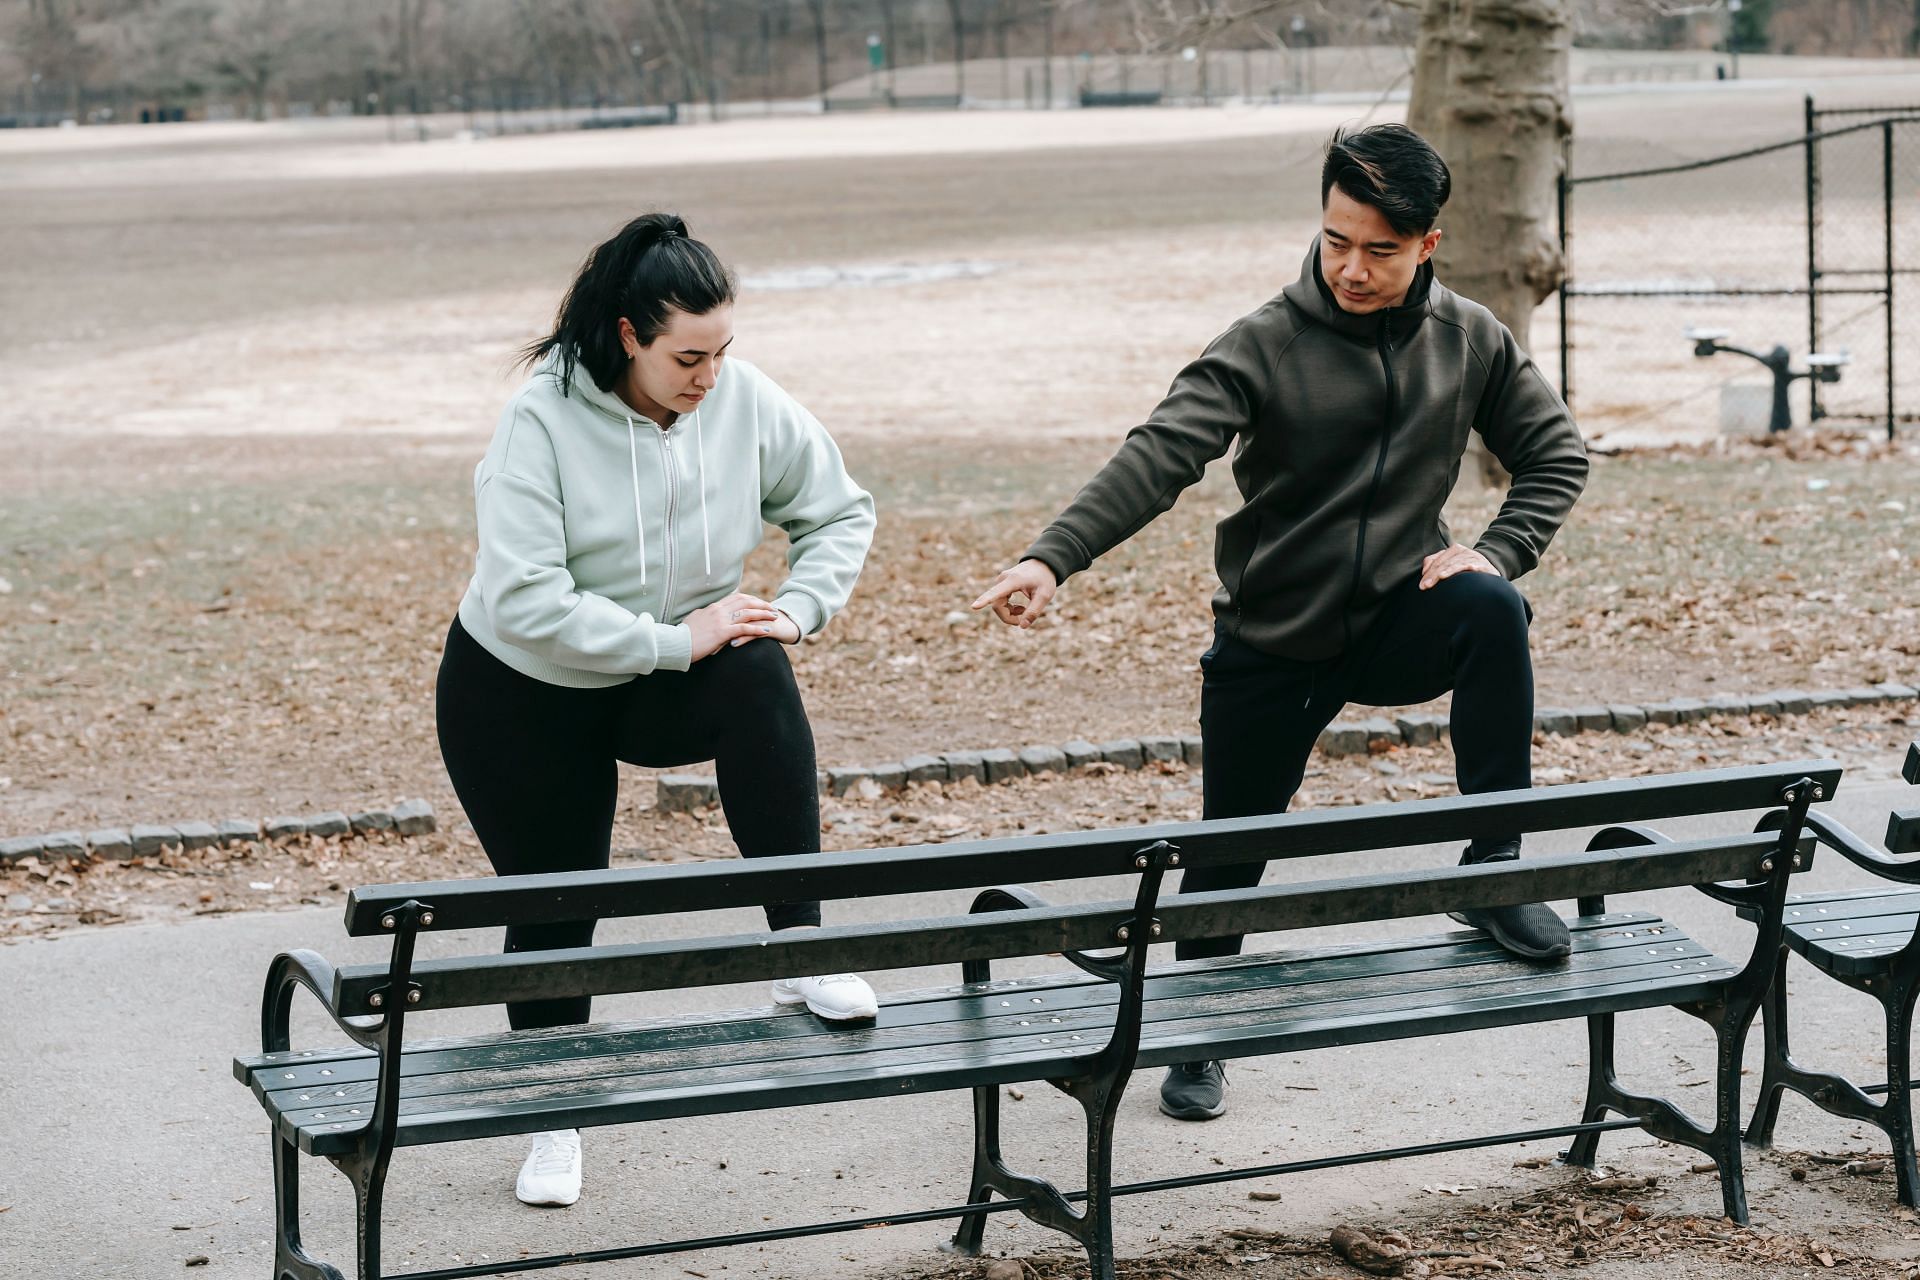 Exercises using a park bench can be an interesting addition to your workout routine (Image via Pexels @Andres Ayrton)